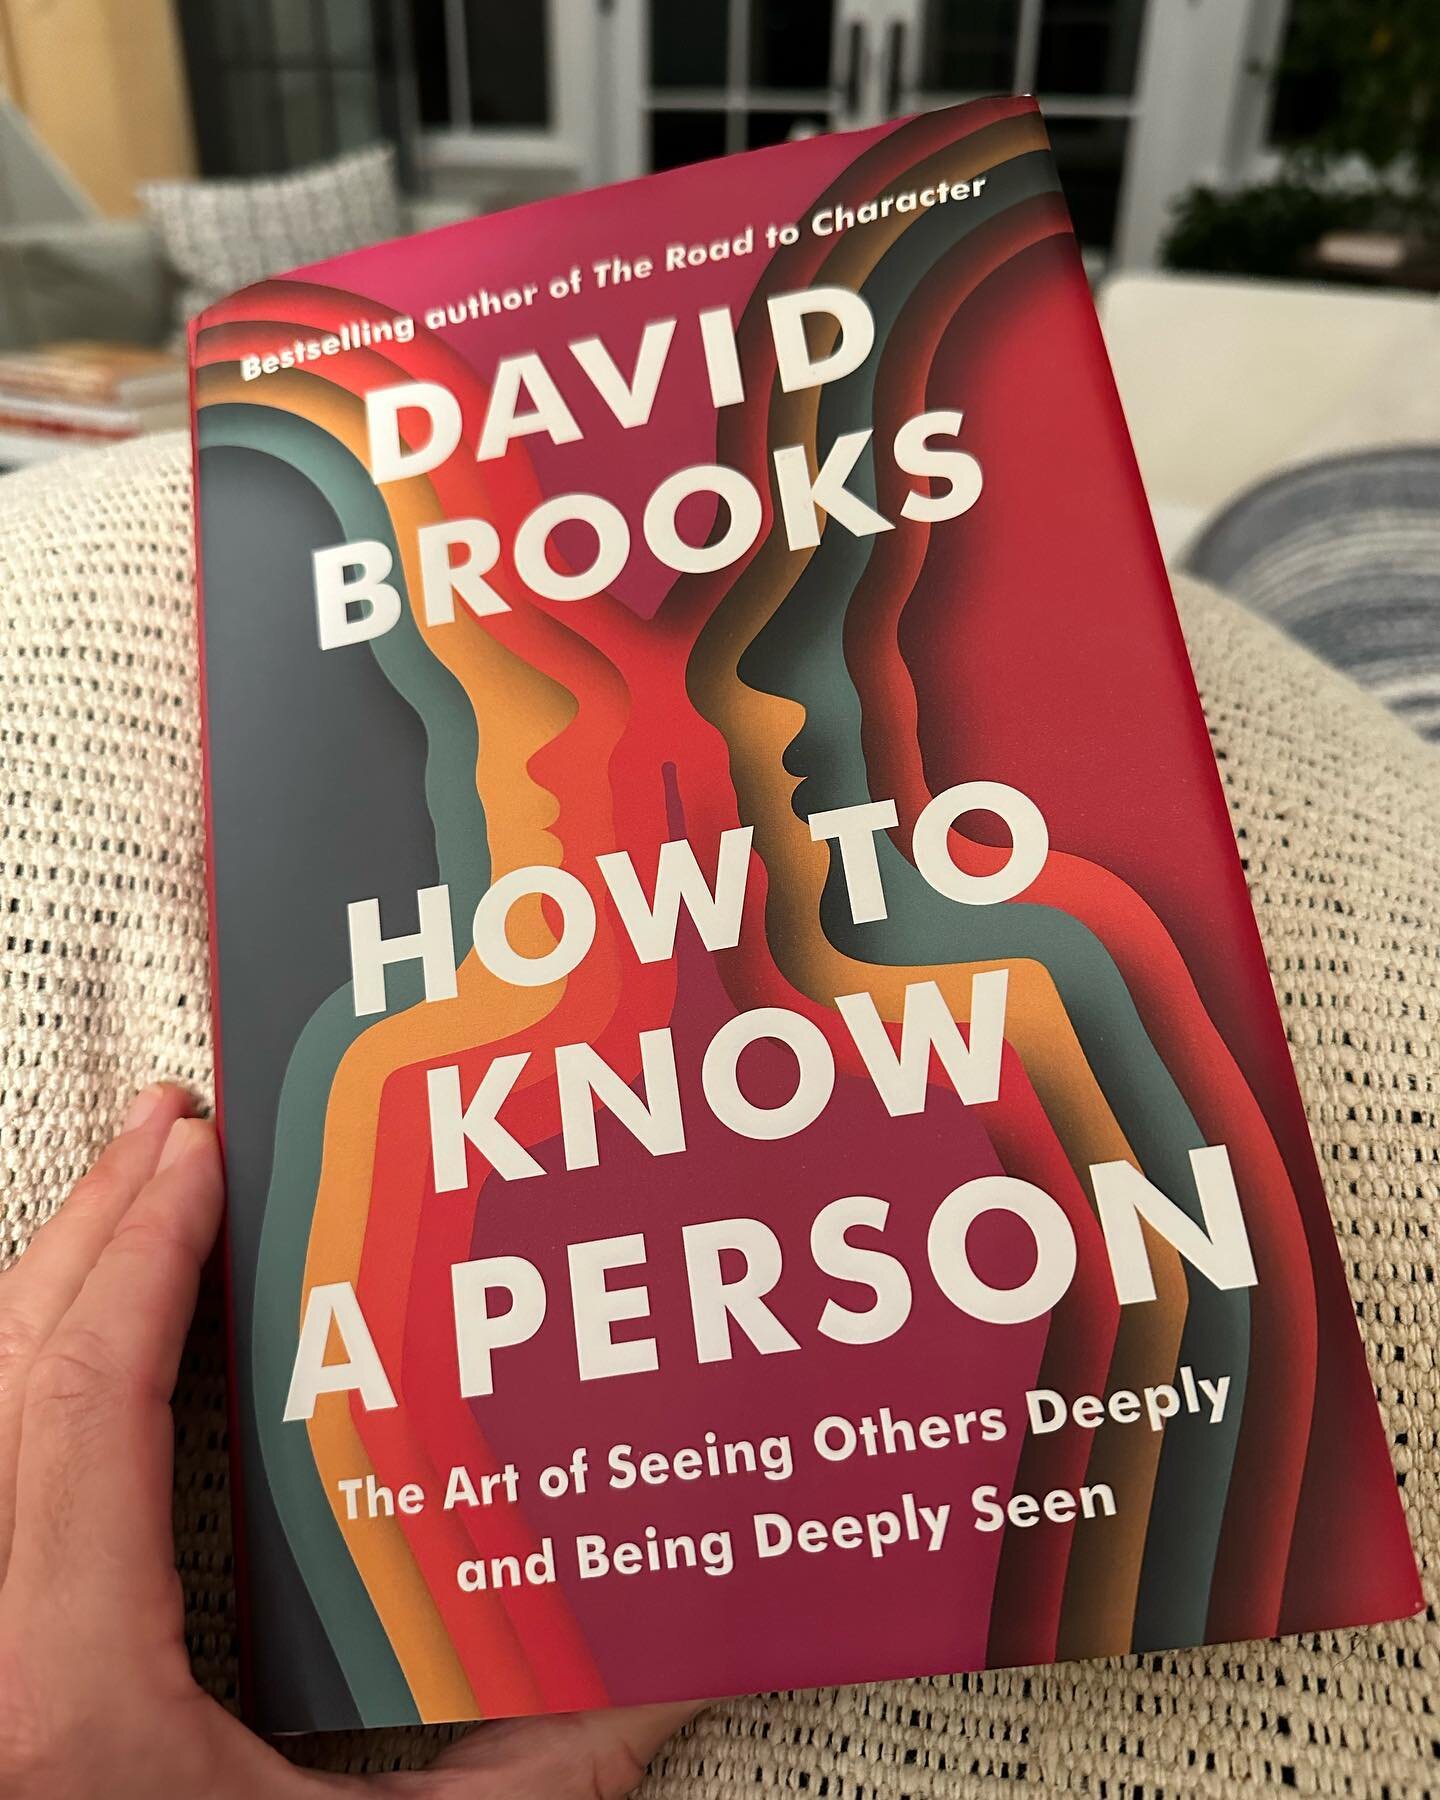 In his latest book, How to Know A Person, David Brooks says &quot;human beings need recognition as much as they need food and water&quot; (9). 

In general, do you feel seen by people around you?  Do you think you are adept at seeing others--understa